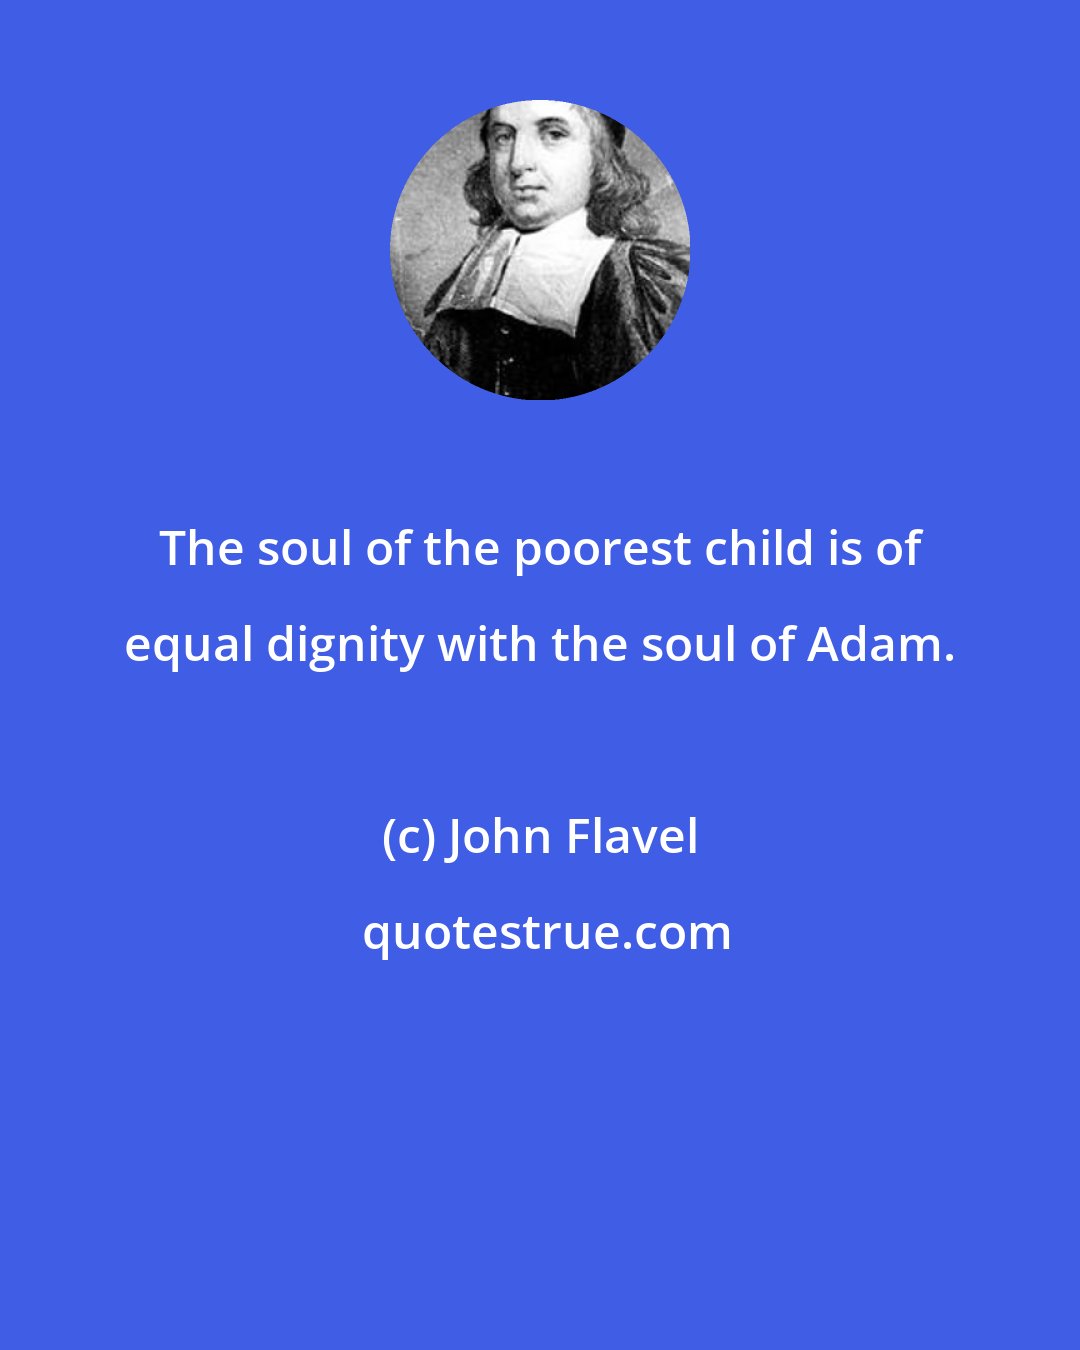 John Flavel: The soul of the poorest child is of equal dignity with the soul of Adam.